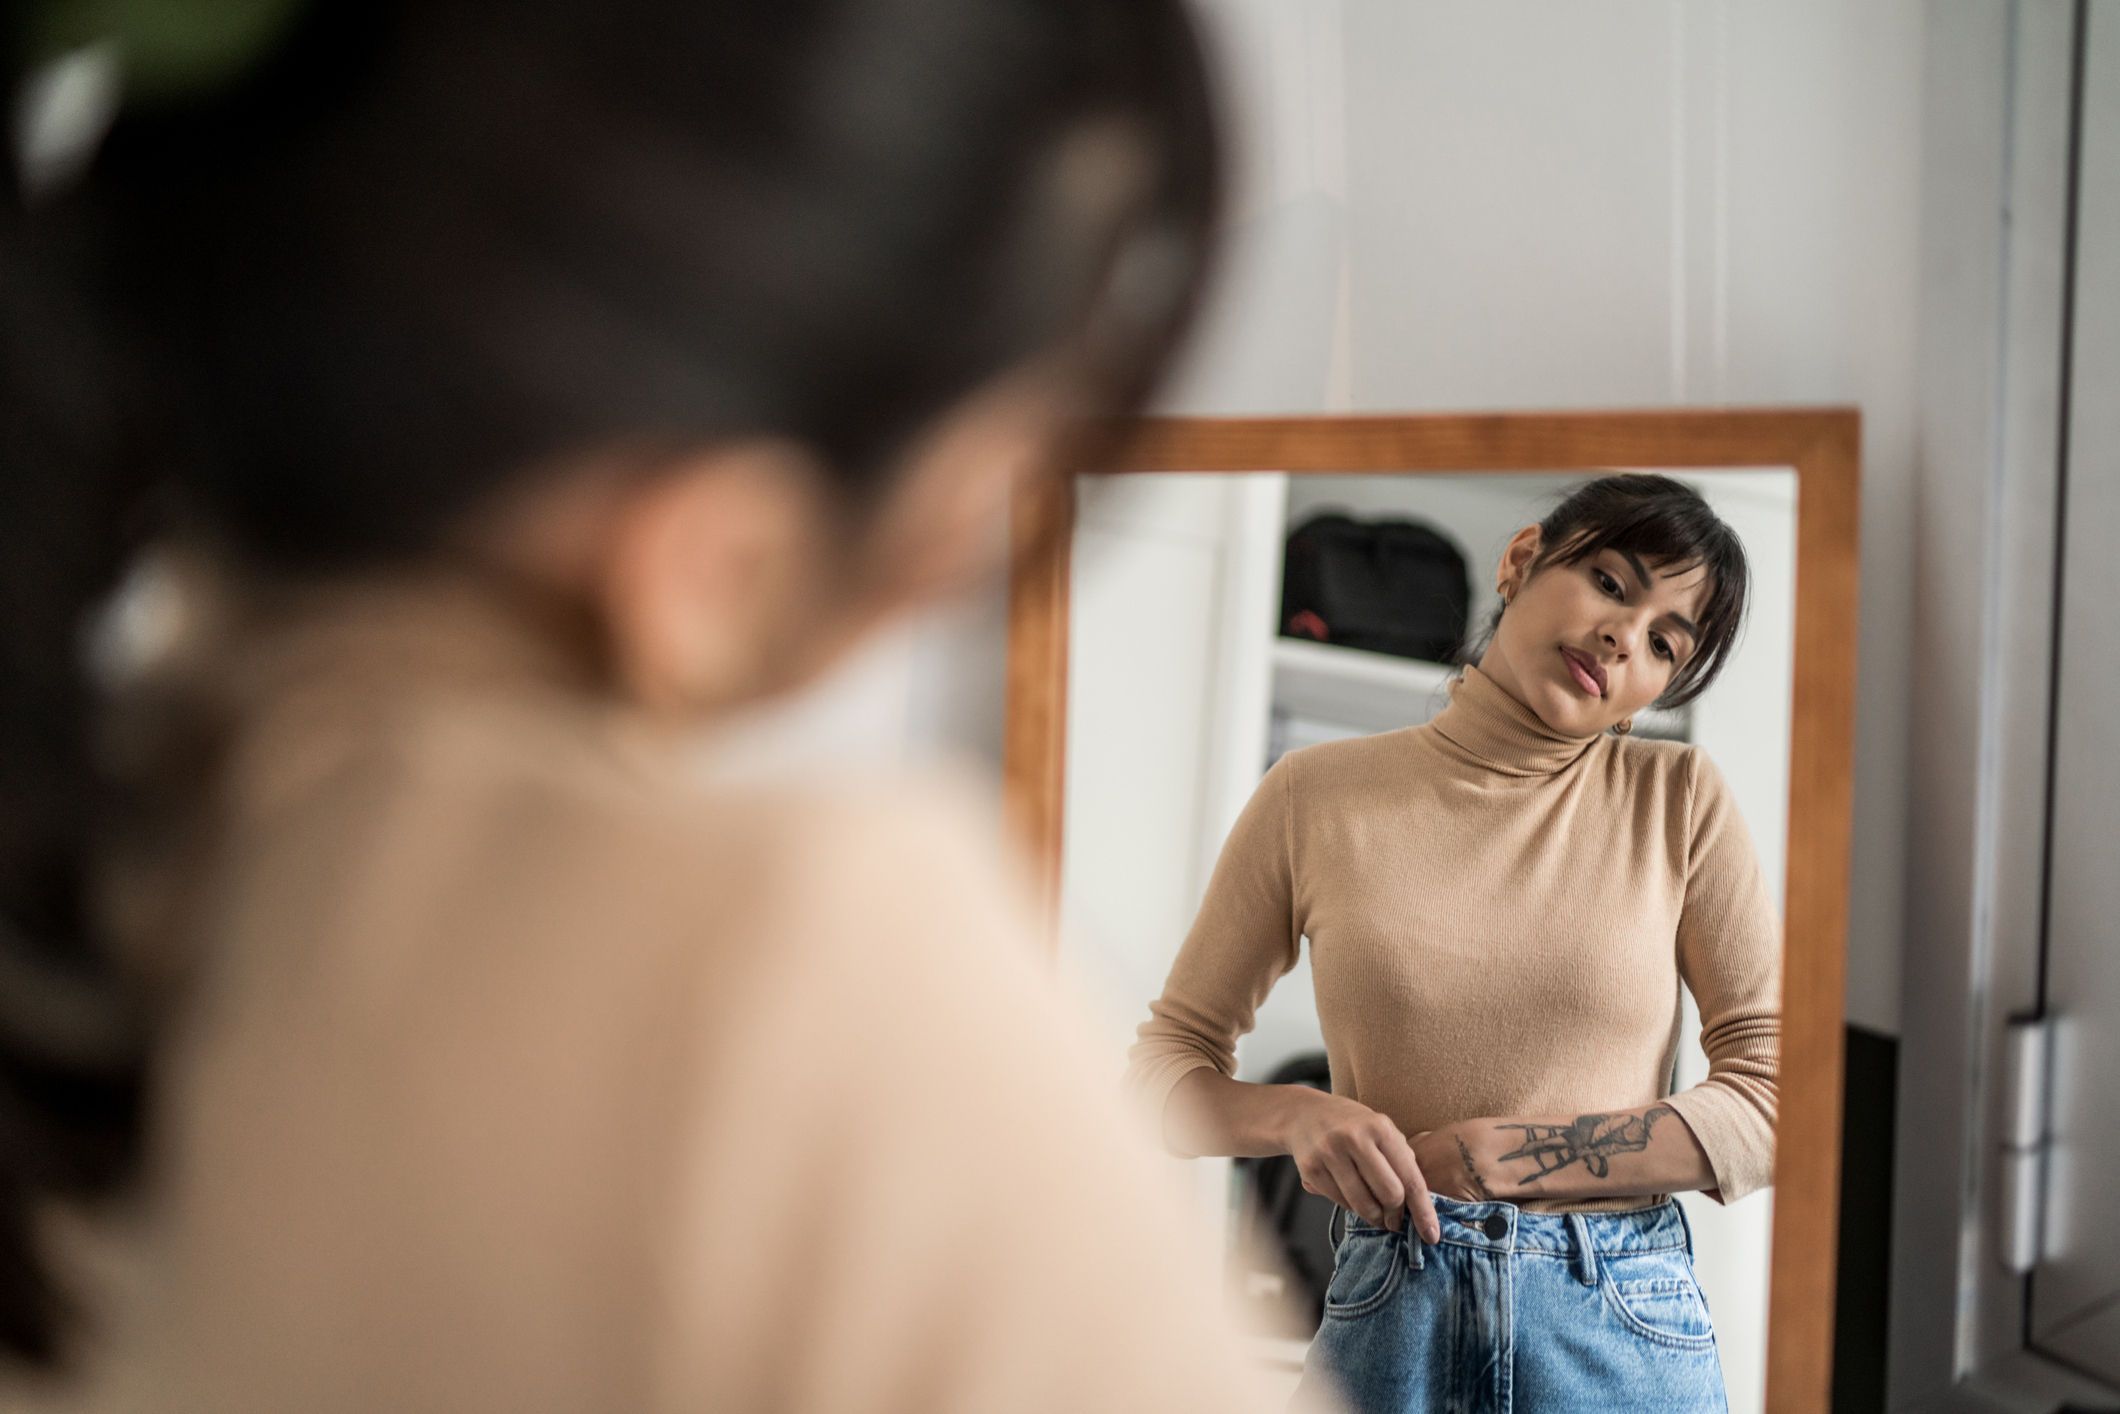 A woman trying on jeans in front of a mirror